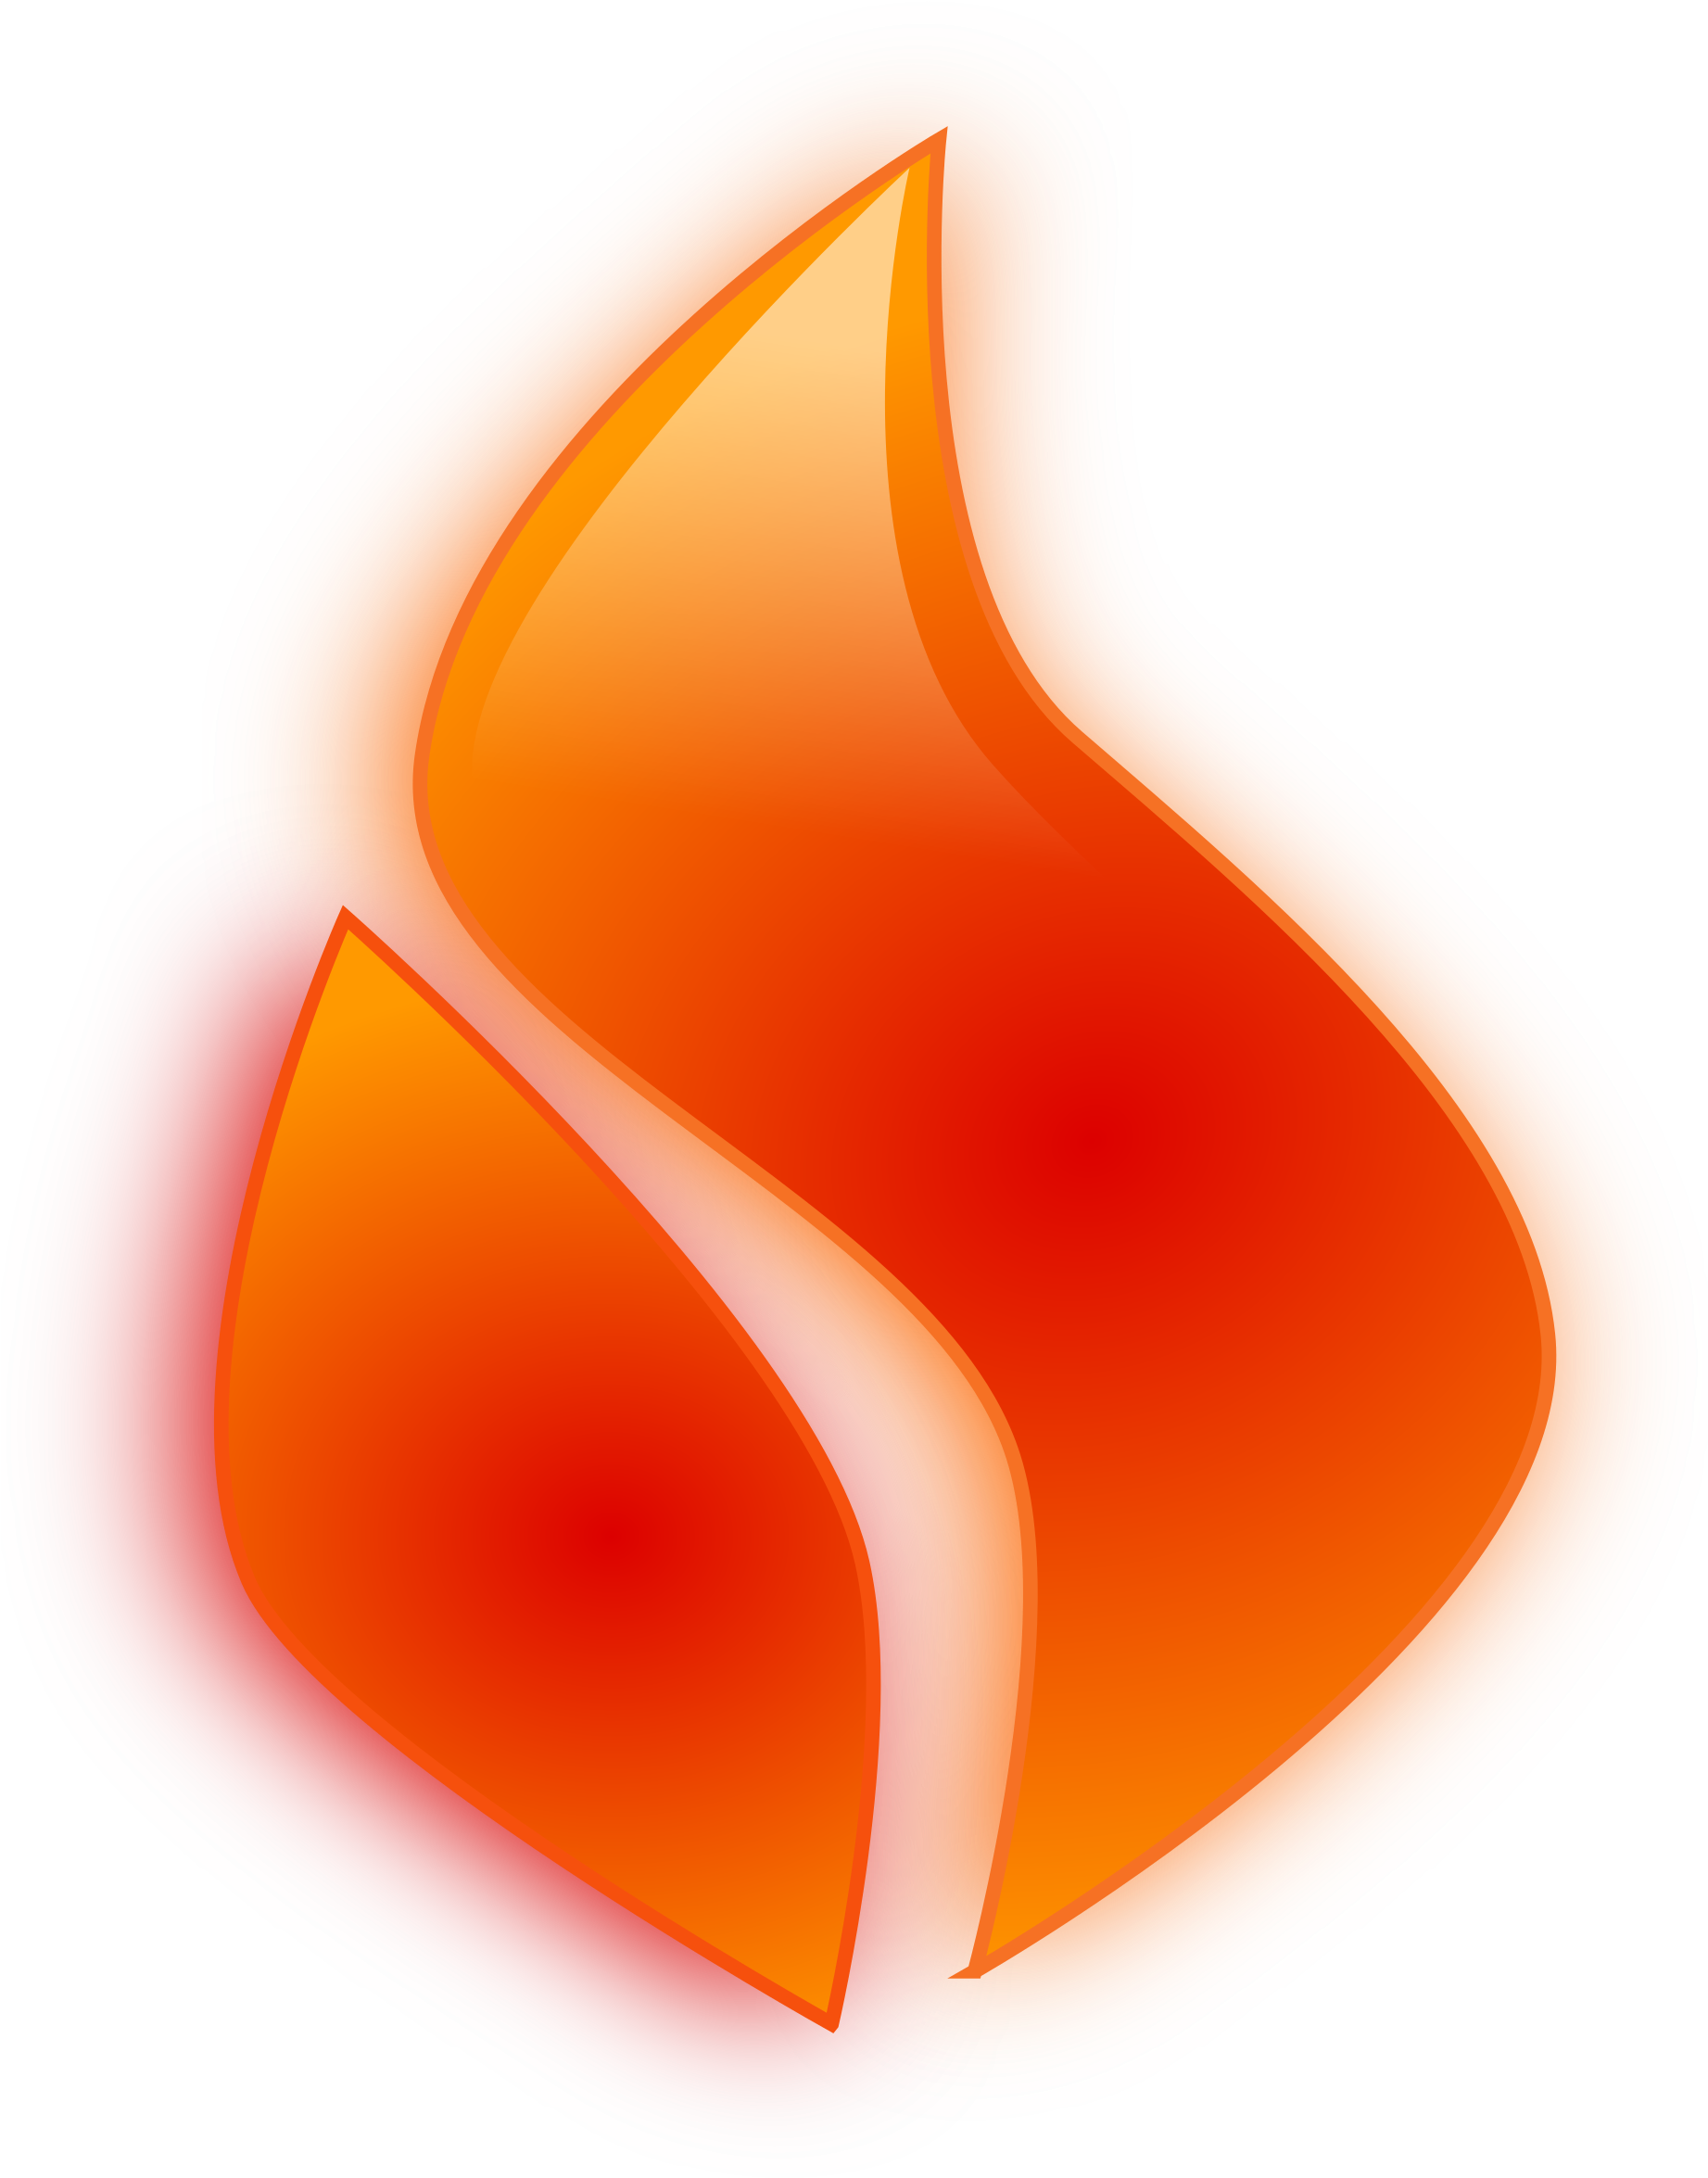 Flame Clipart Heat - Portable Network Graphics (2400x2400)